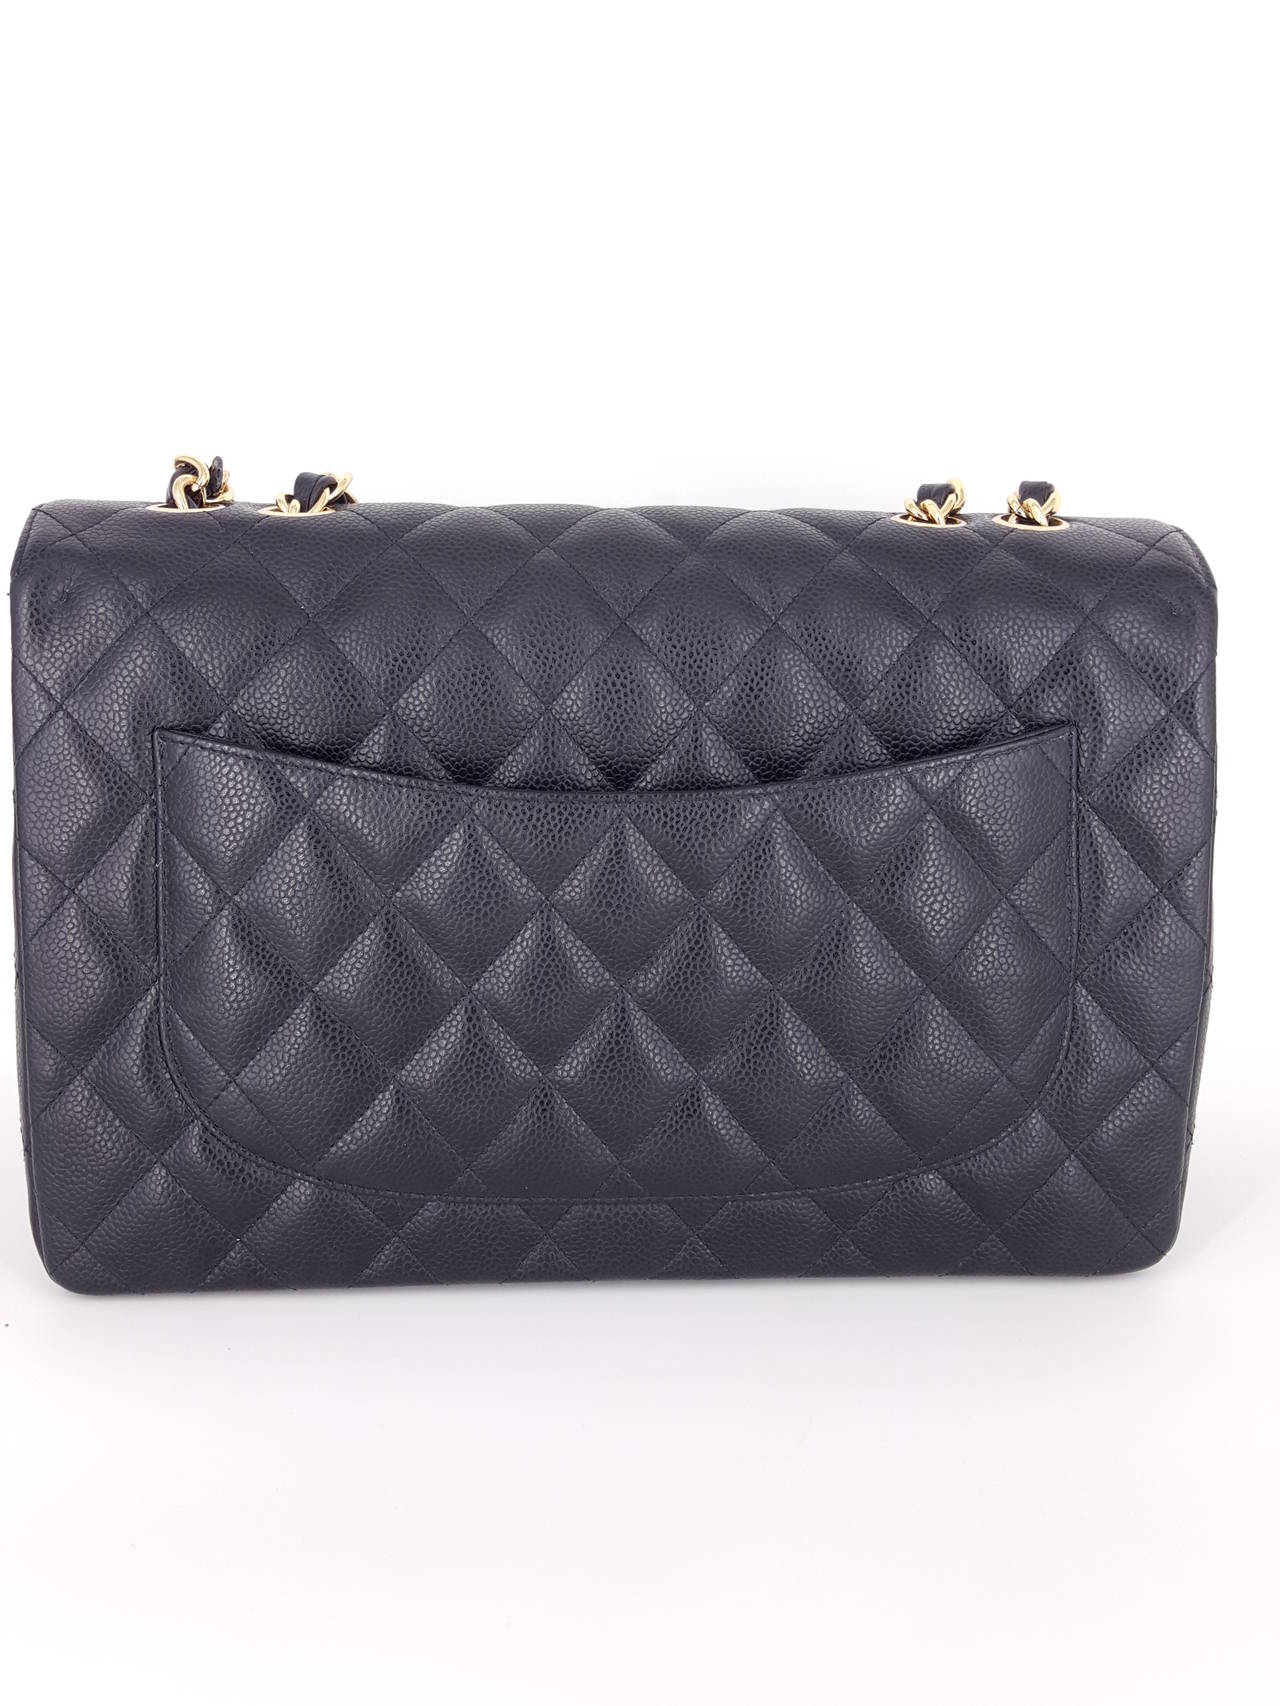 Offered for sale is a Very gently worn Chanel XL Jumbo single Flap in beautiful caviar with gold hardware.  This beautiful and timeless classic from 2006, has only been gently carried,  No signs of wear and the hardware is bright and  in excellent